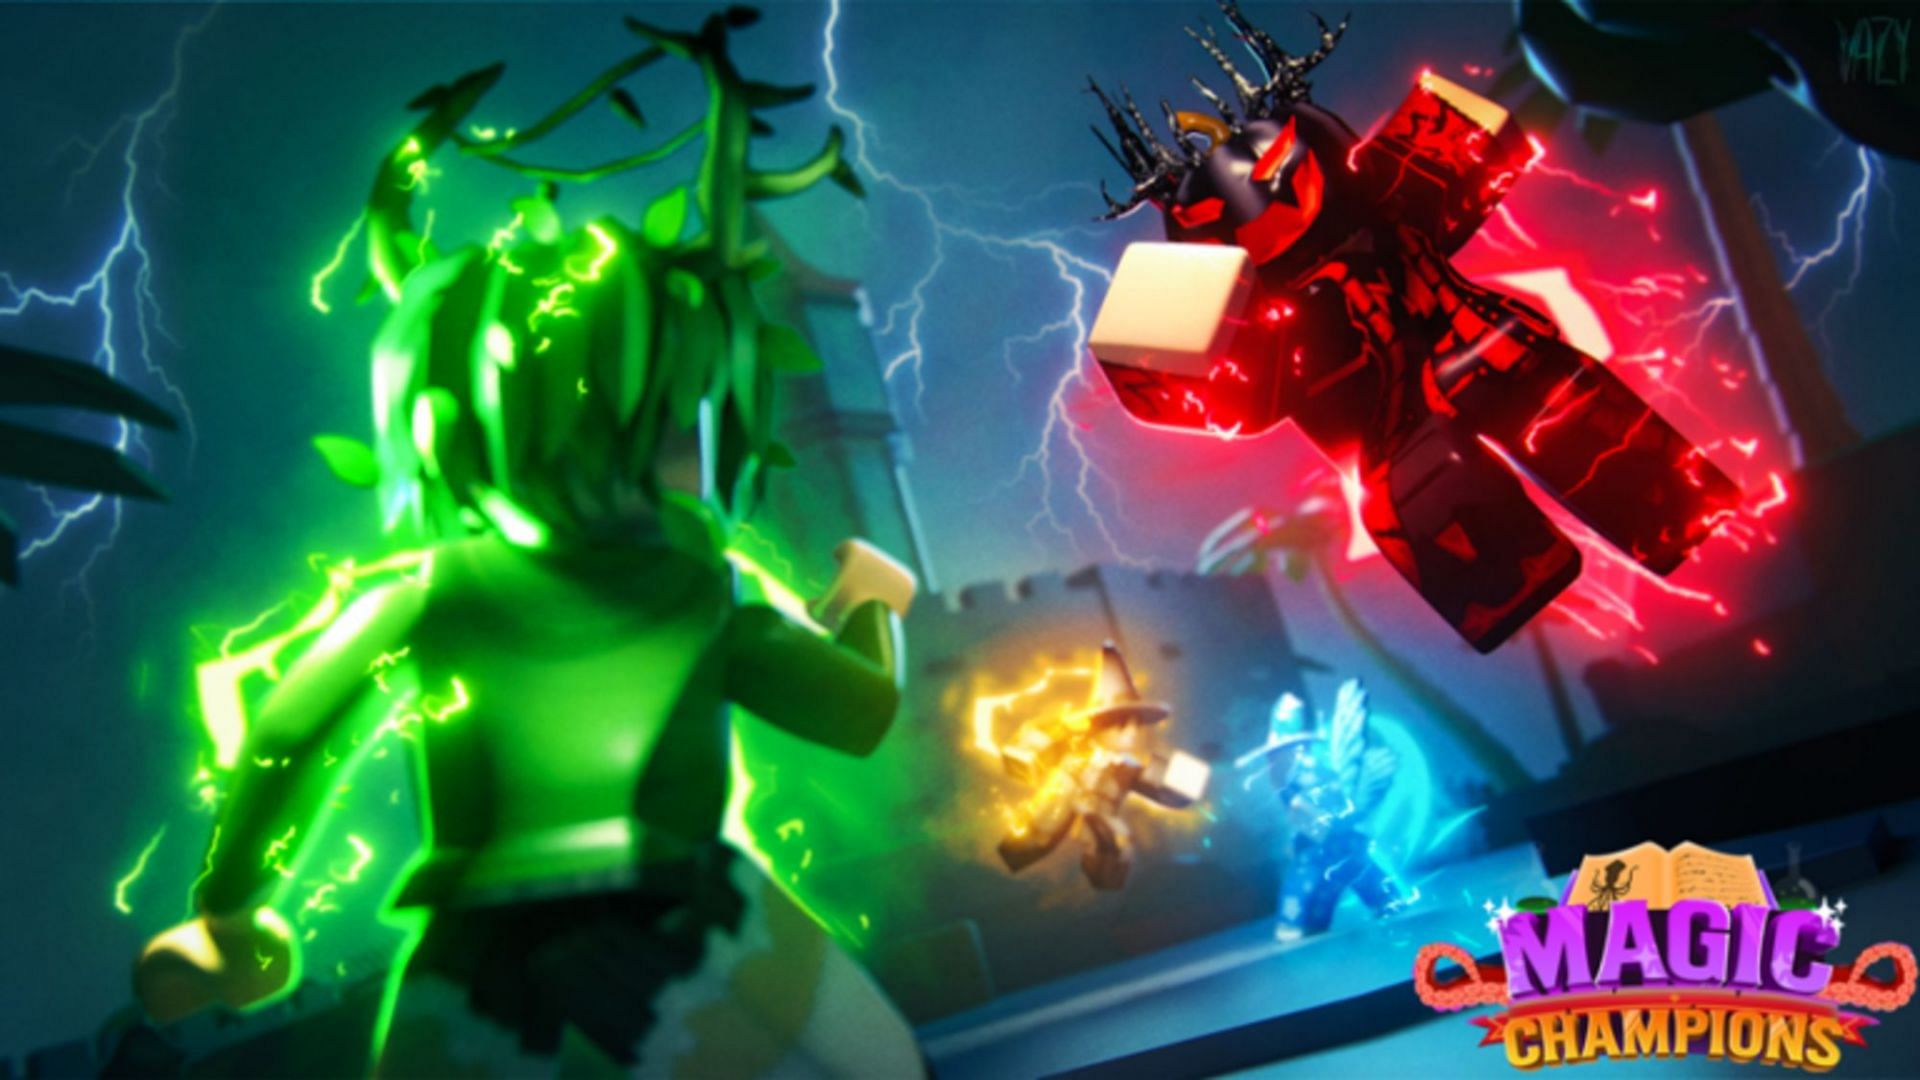 magic-champions-codes-in-roblox-free-tokens-spells-and-more-october-2022